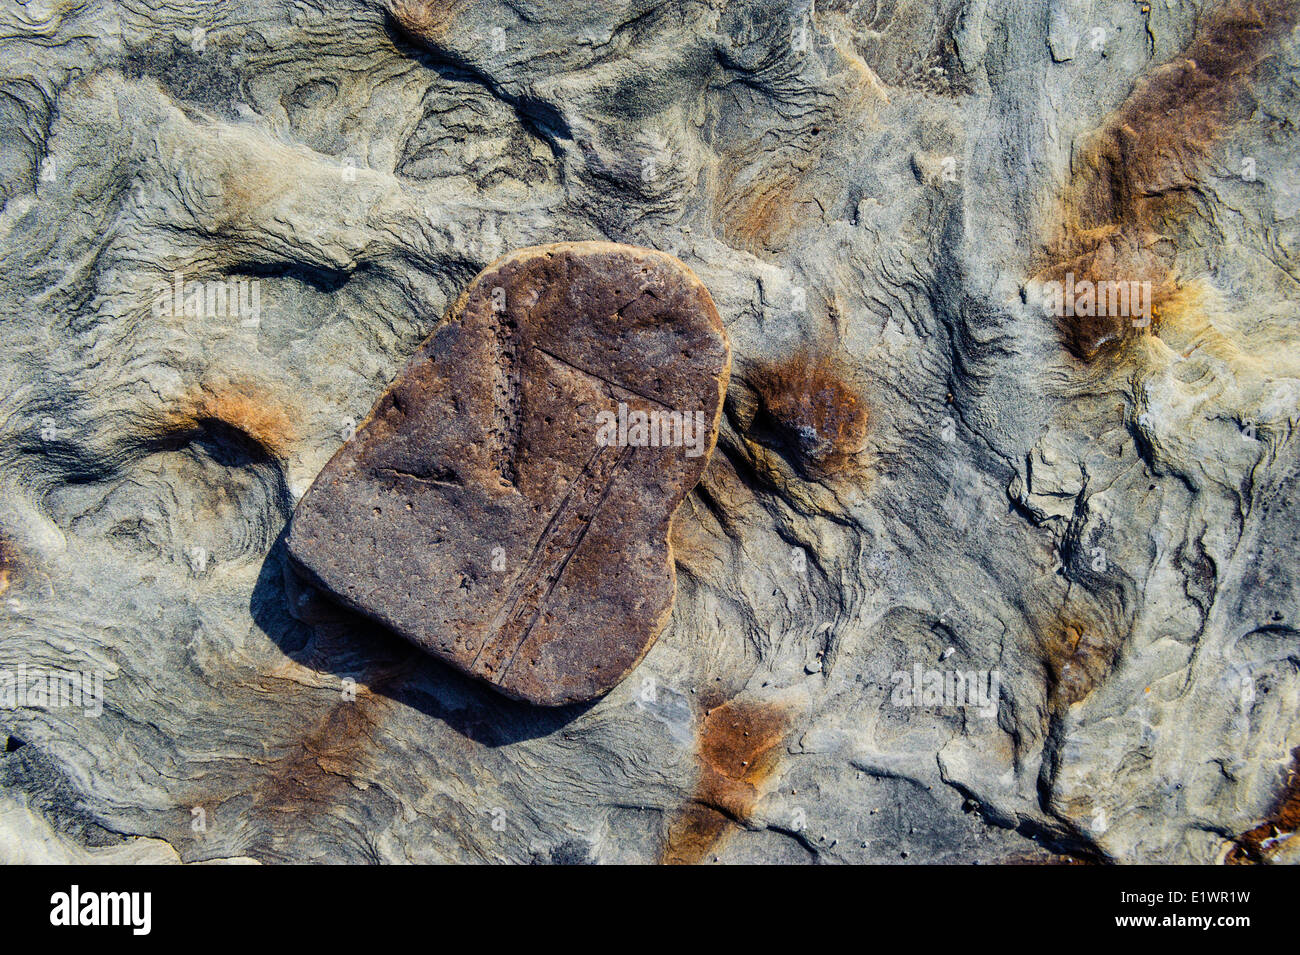 Plant fossils the Coal Age's carboniferous forests dating 300 million years are uncovered in the Joggins Fossil Cliffs by the Stock Photo